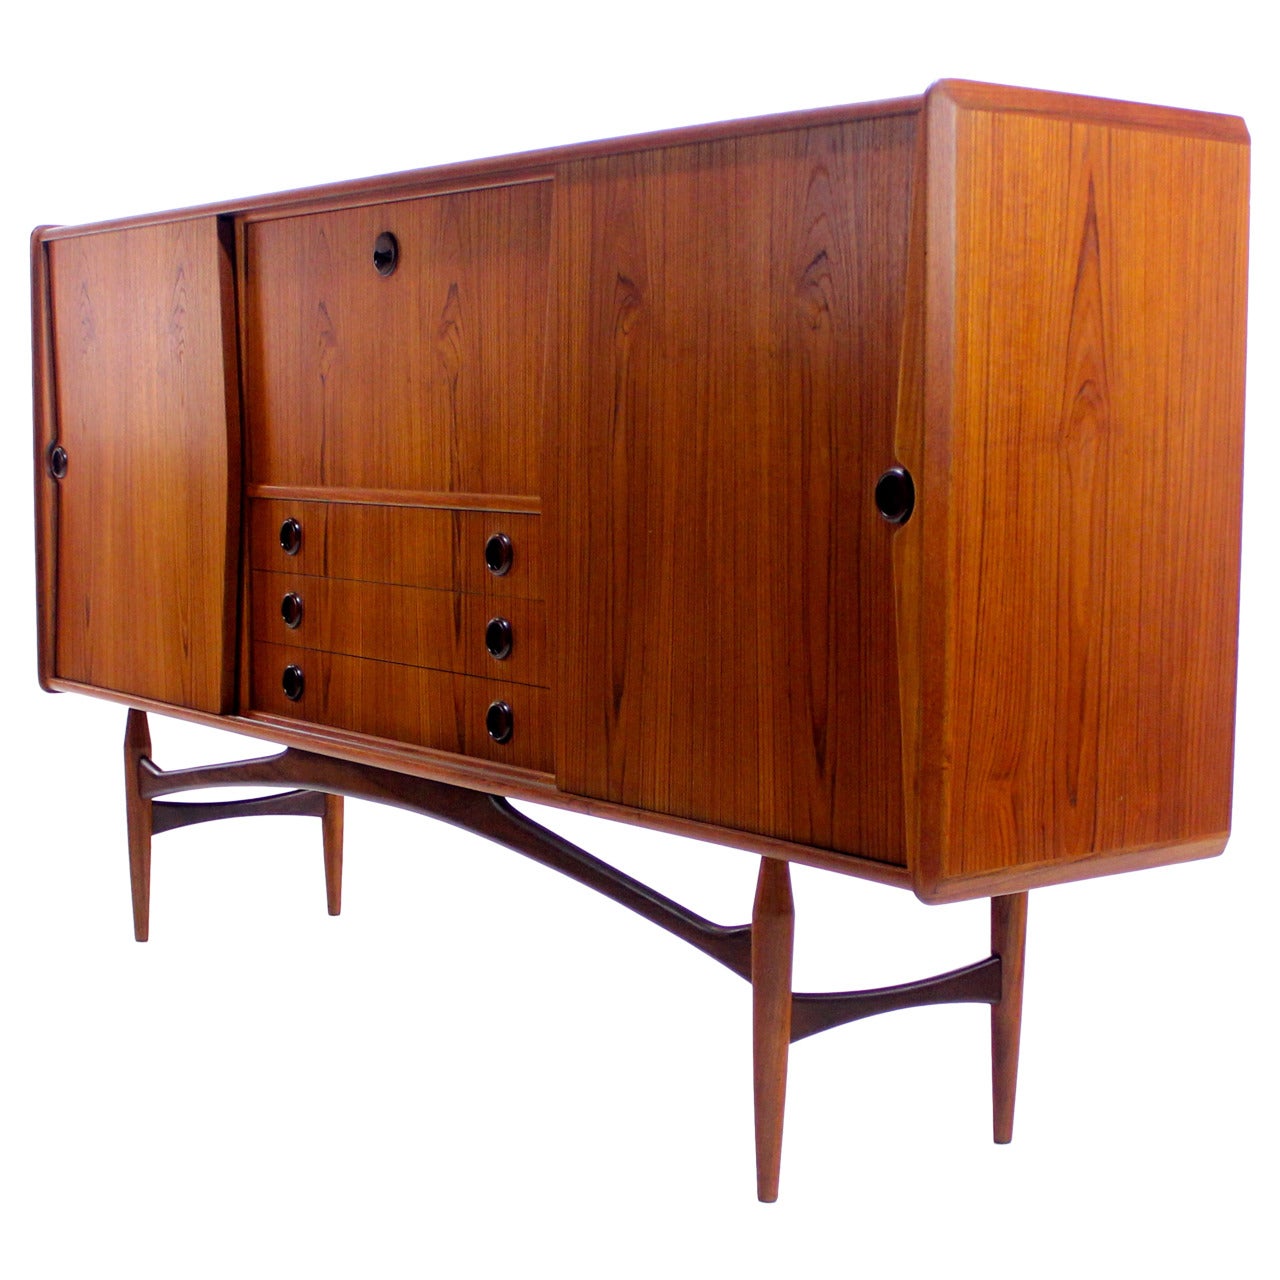 Exceptional Danish Modern Teak Credenza with Dazzling Detailing For Sale